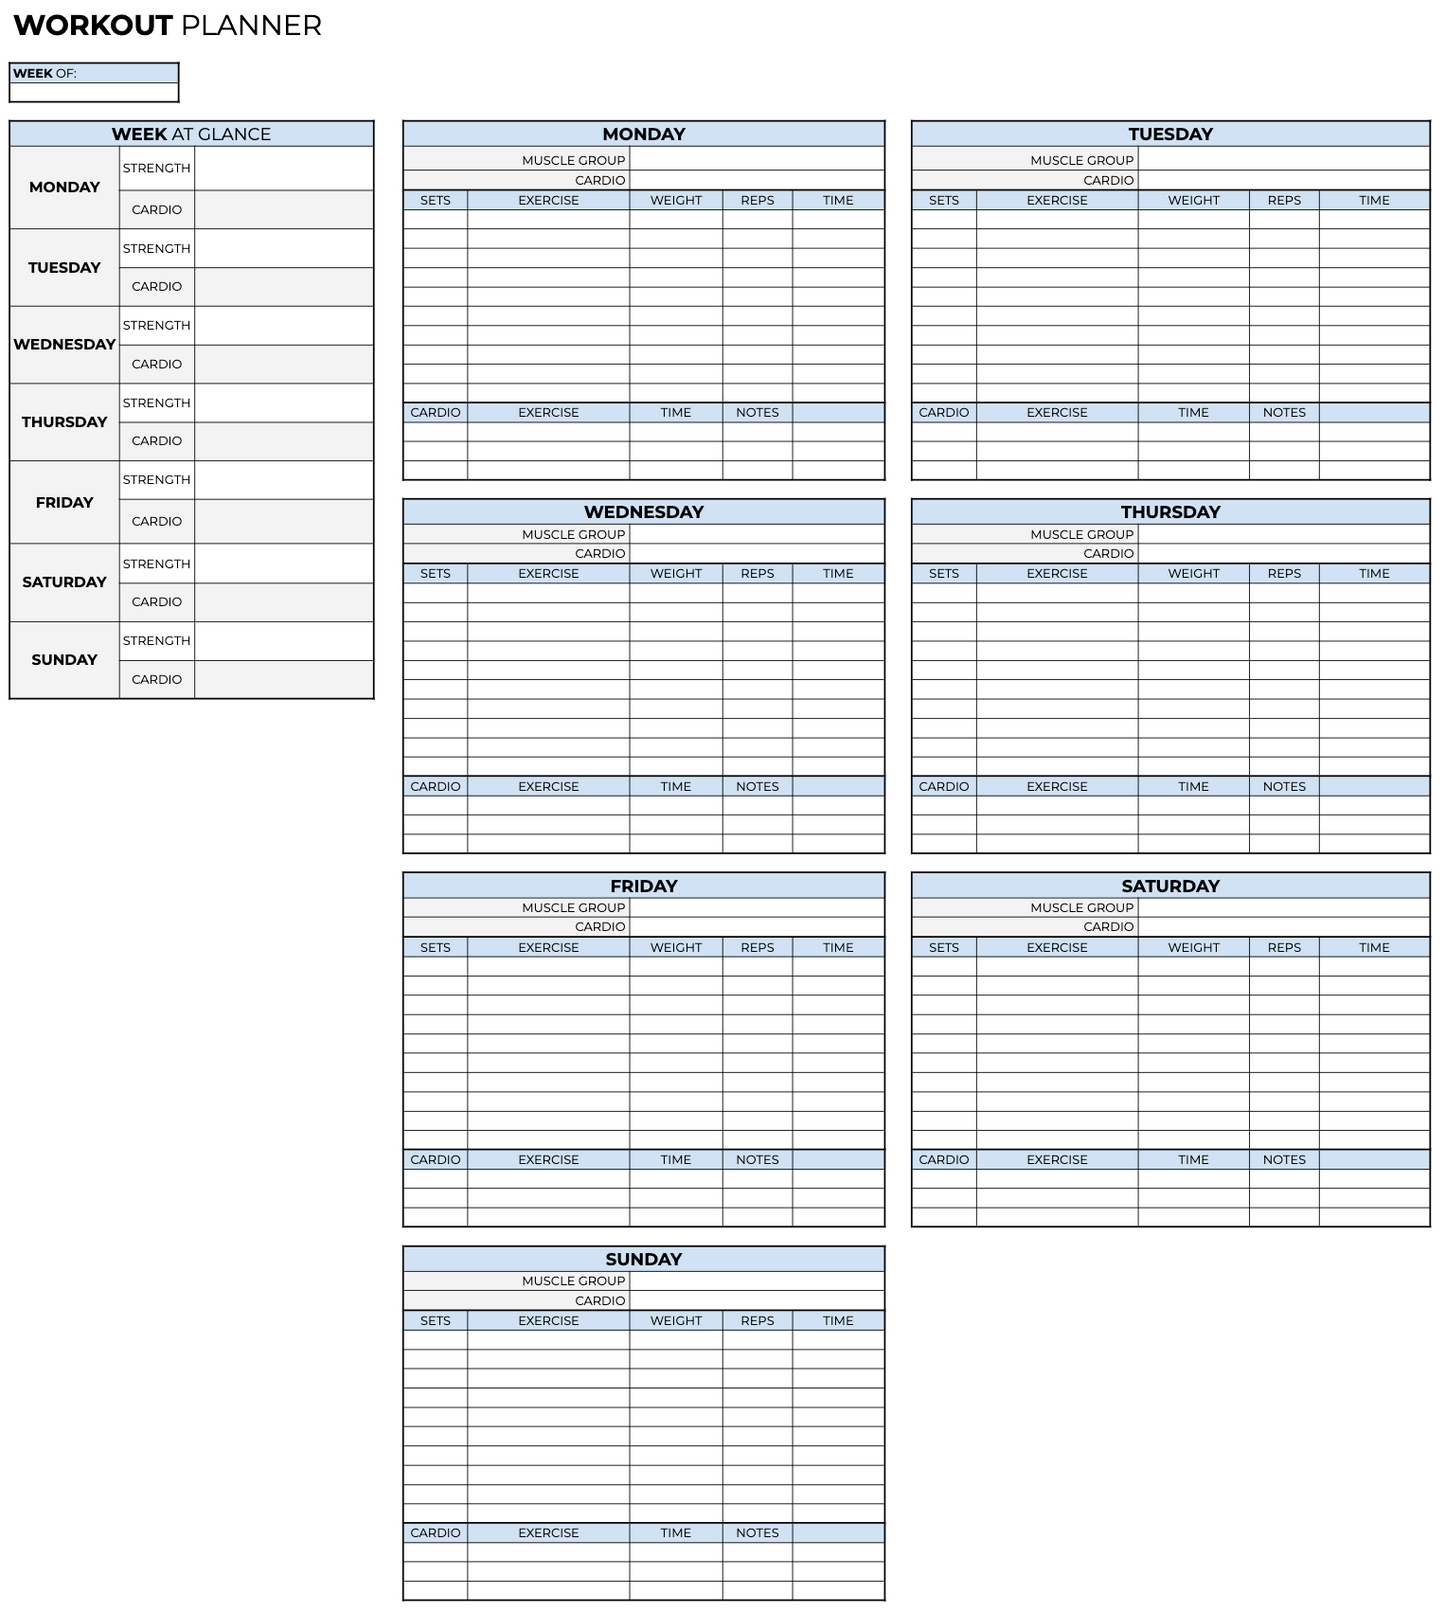 another screenshot of the weekly workout plan template